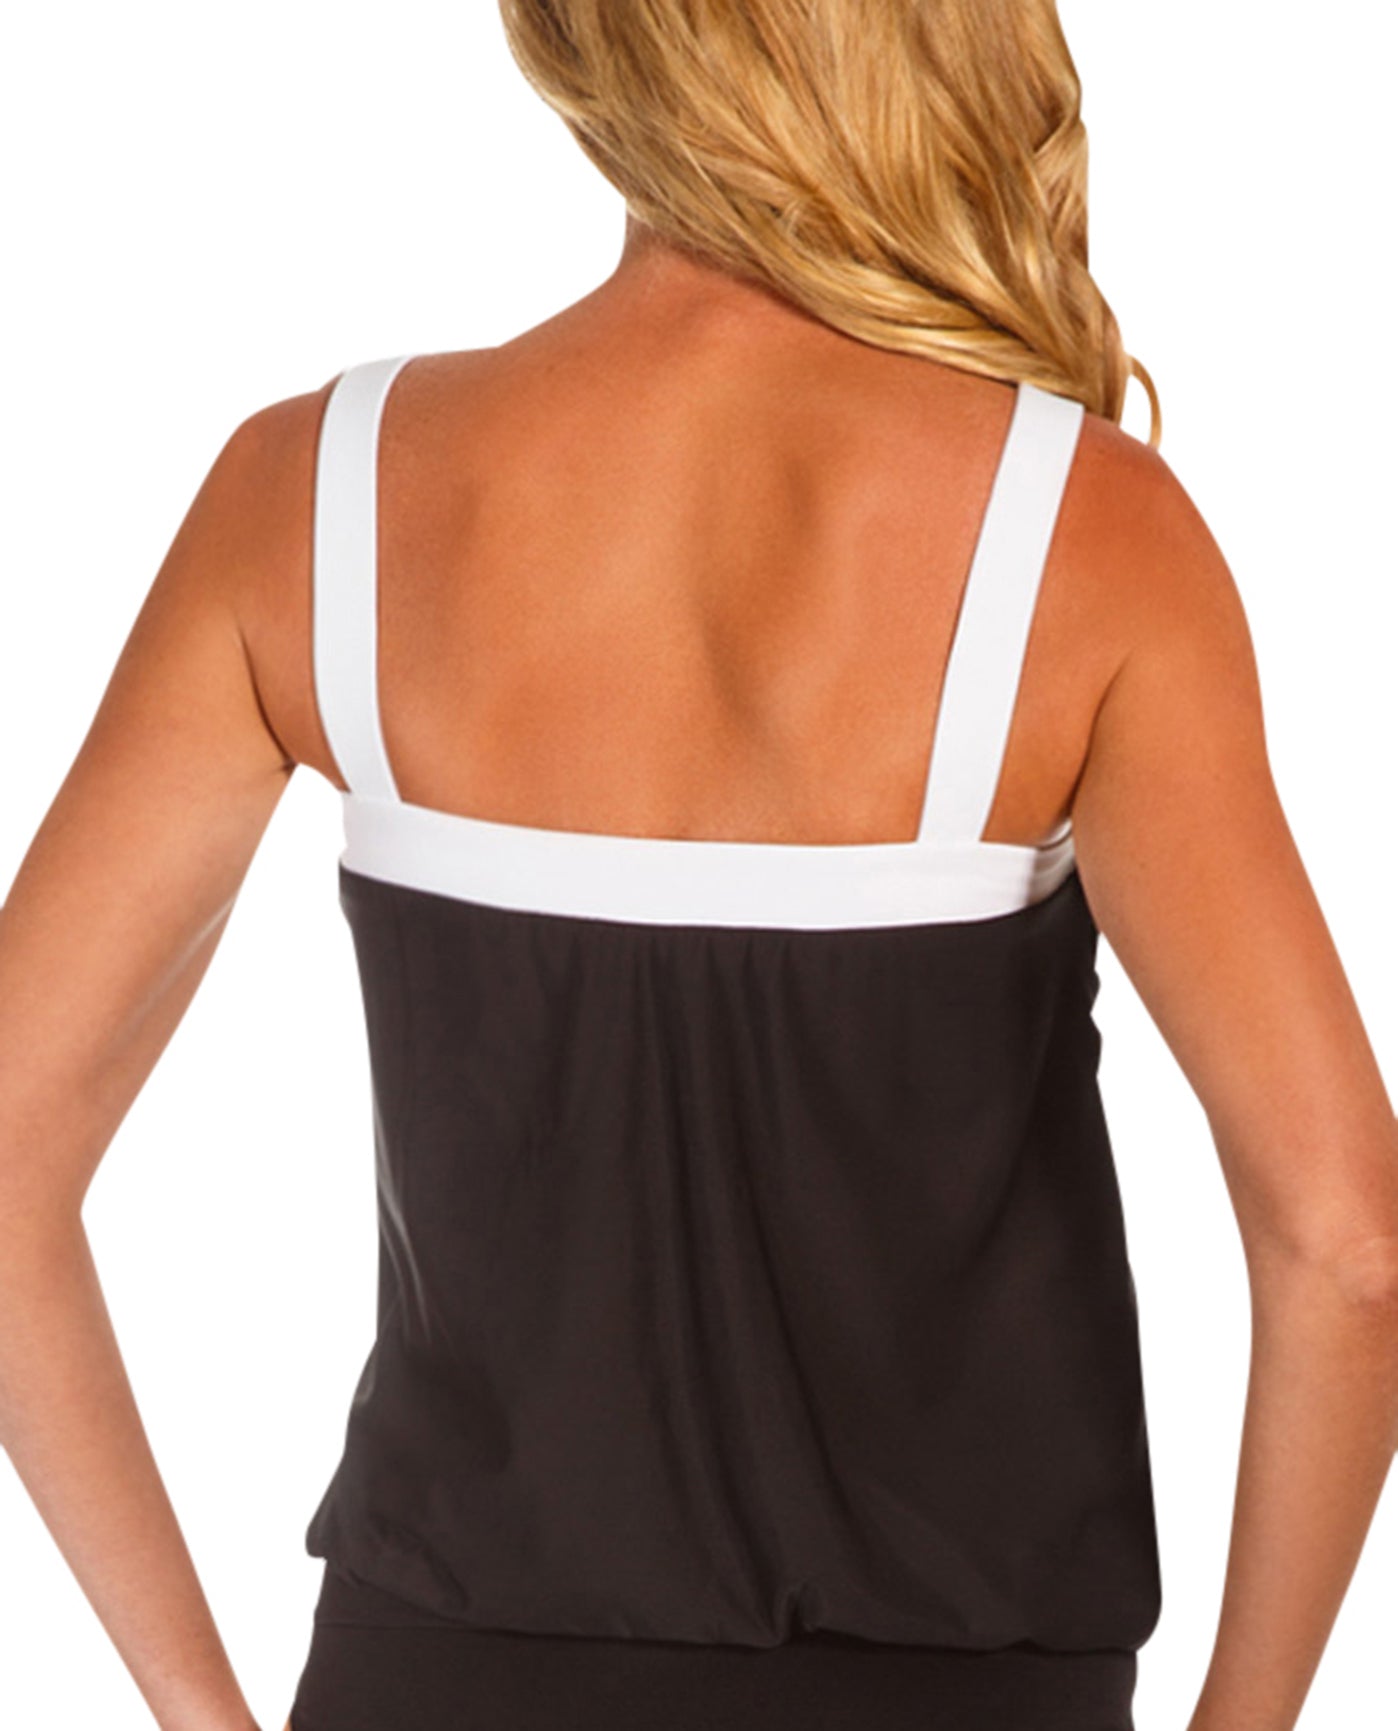 Back View Of Miraclesuit White Colorblock D-Cup Breezy Tankini Top | MIR Black White